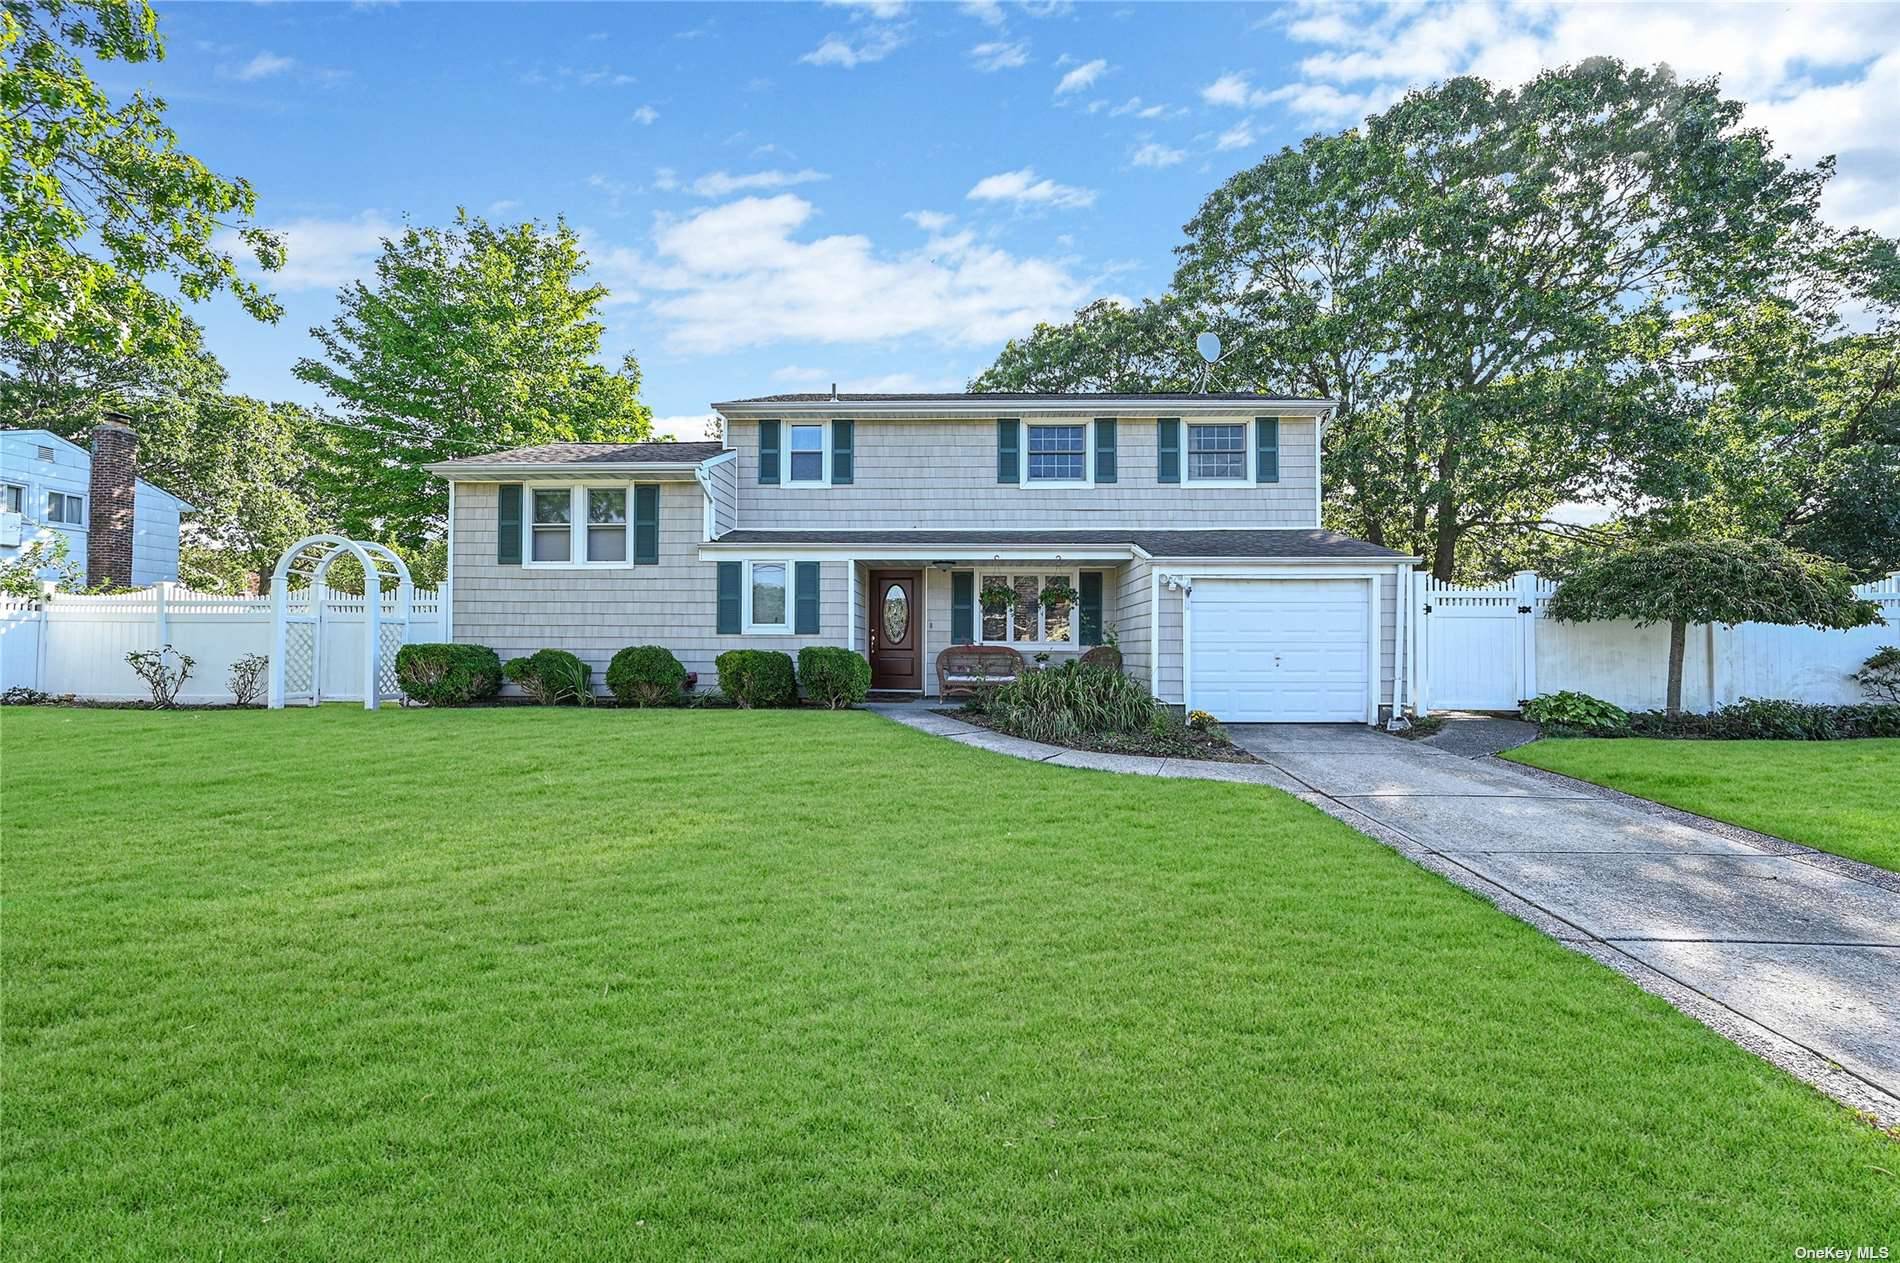 Come see this stunning sprawling colonial !